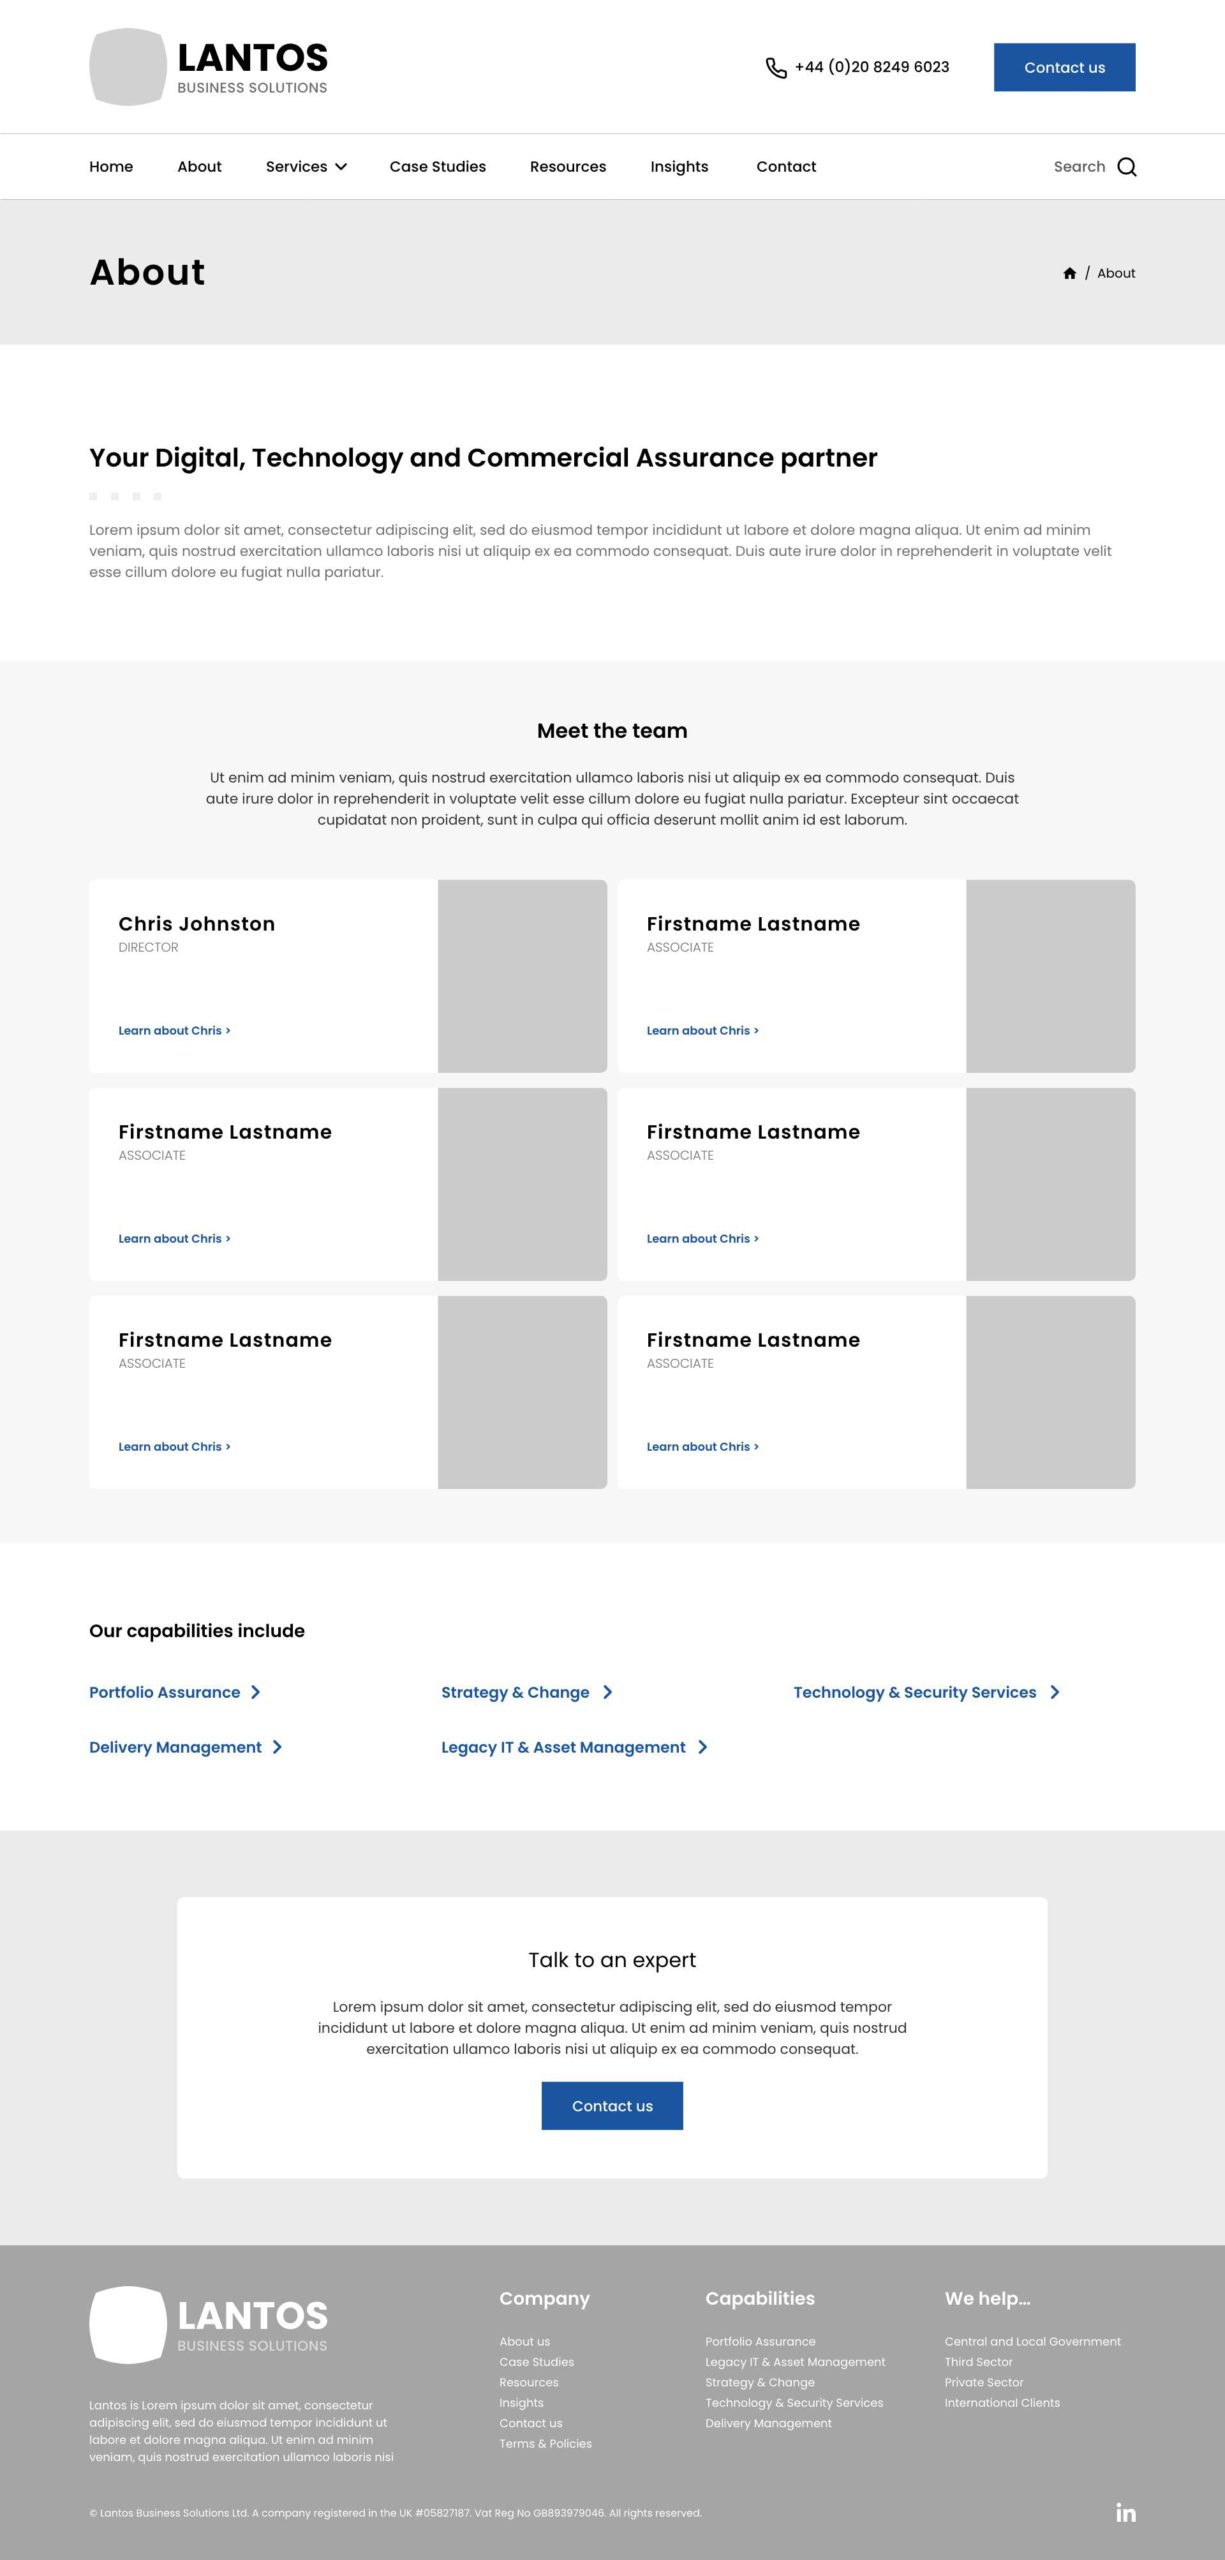 ethical-pixels-case-study-lantos-business-solutions-about-wireframe